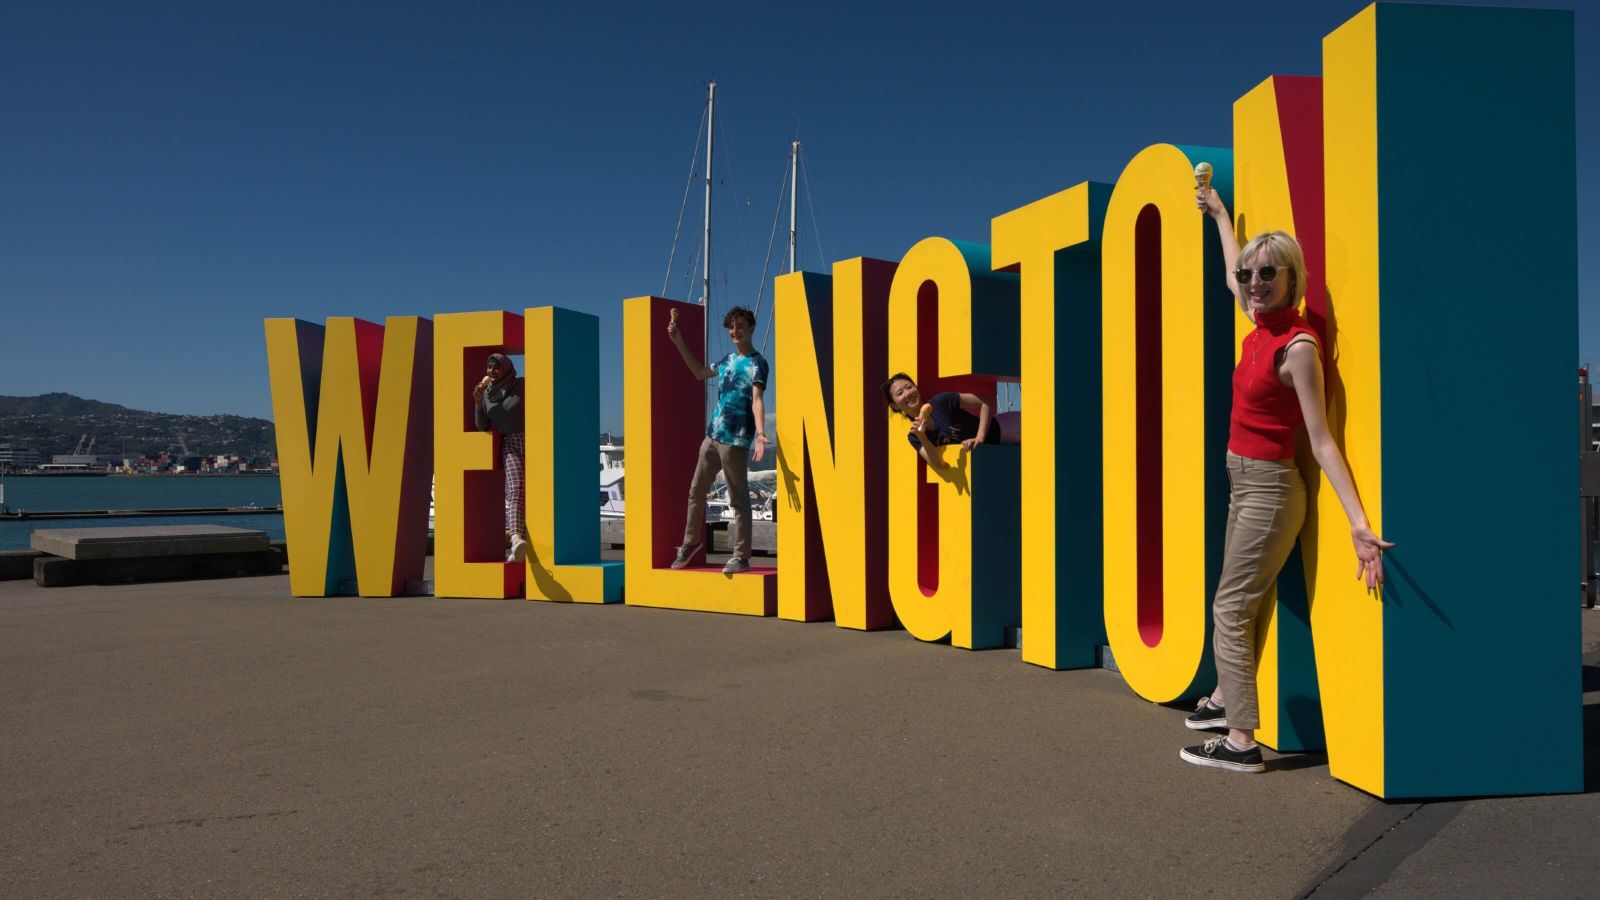 Students standing next to and on the yellow ‘Wellington’ sign on the waterfront.